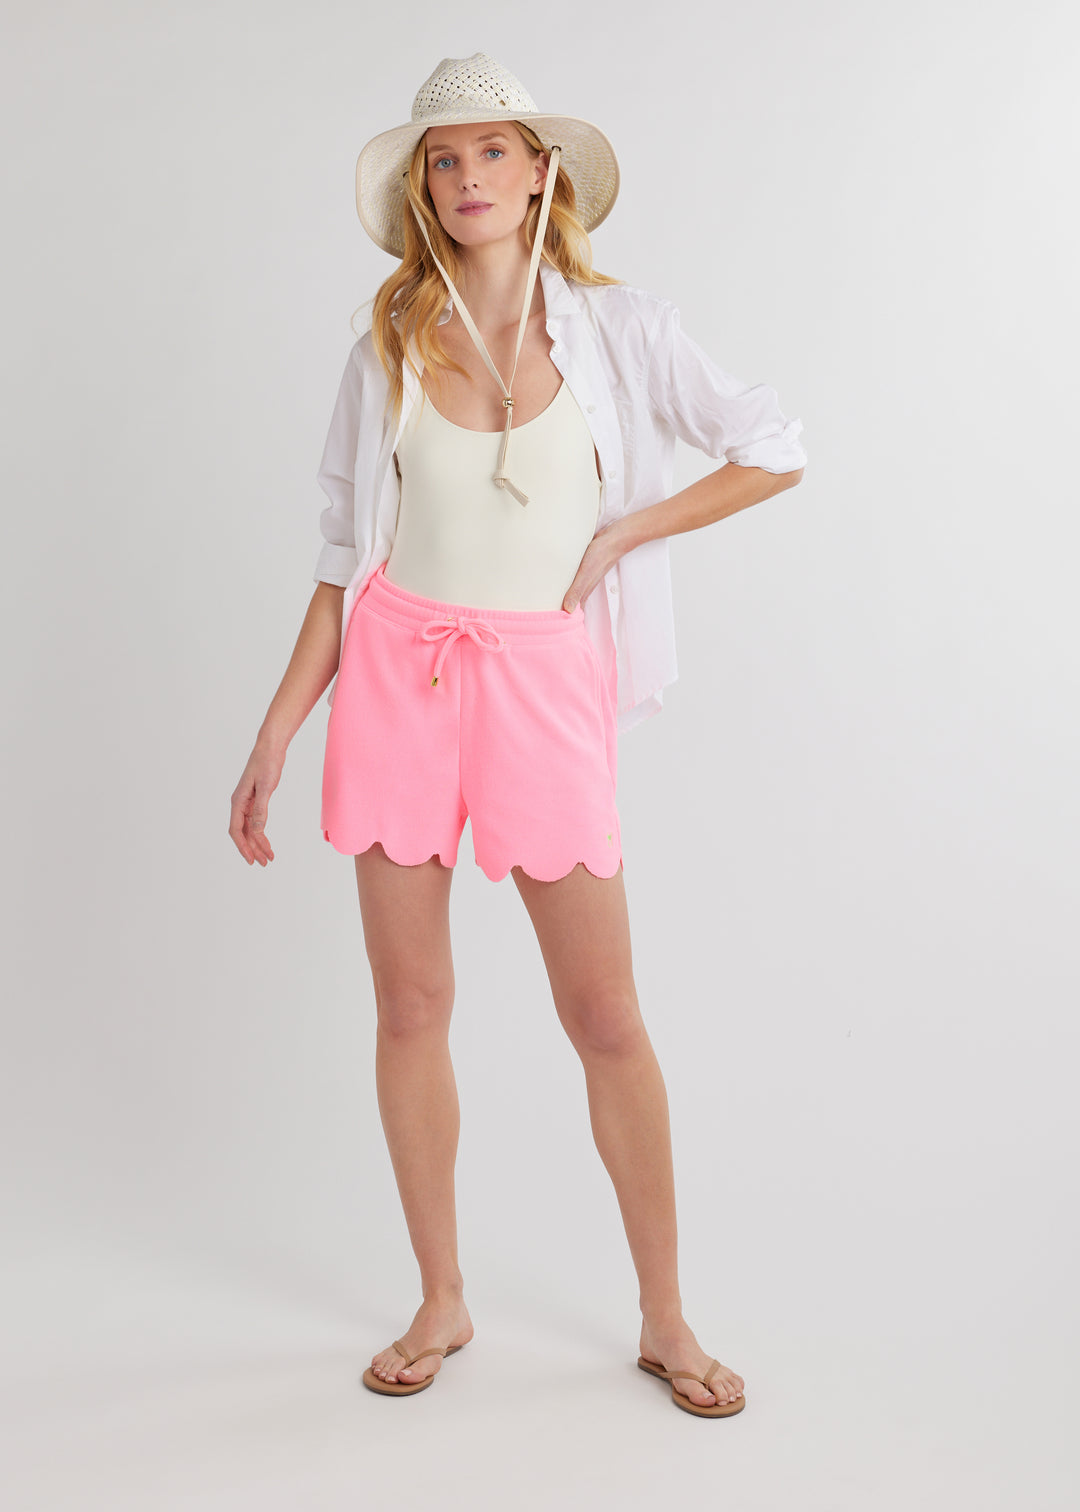 Starboard Short in Terry Fleece (Cotton Candy)